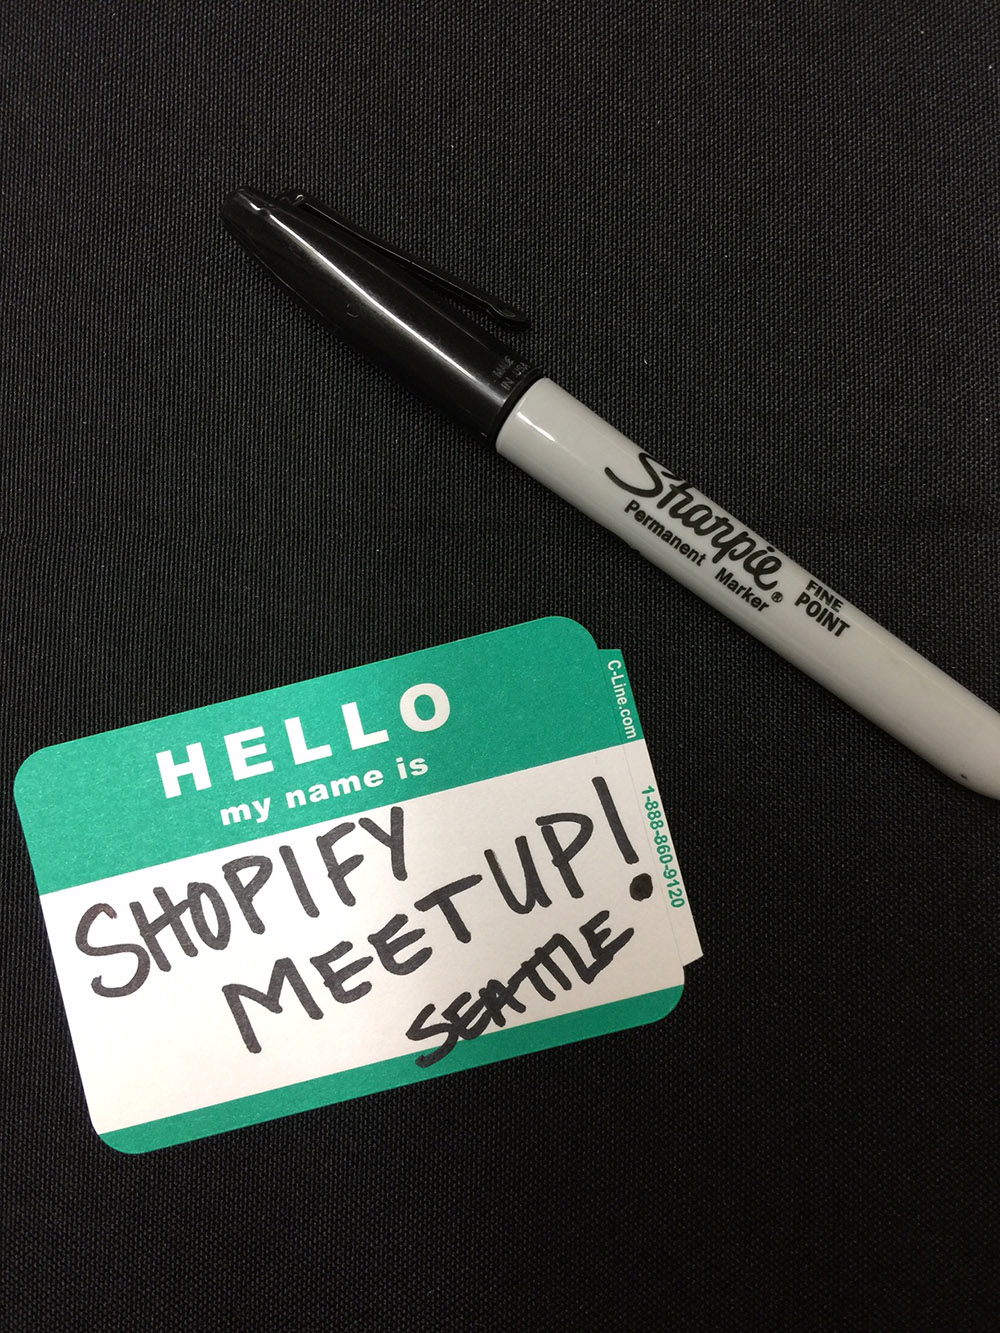 Shopify Seattle Event – Marketing and Metrics